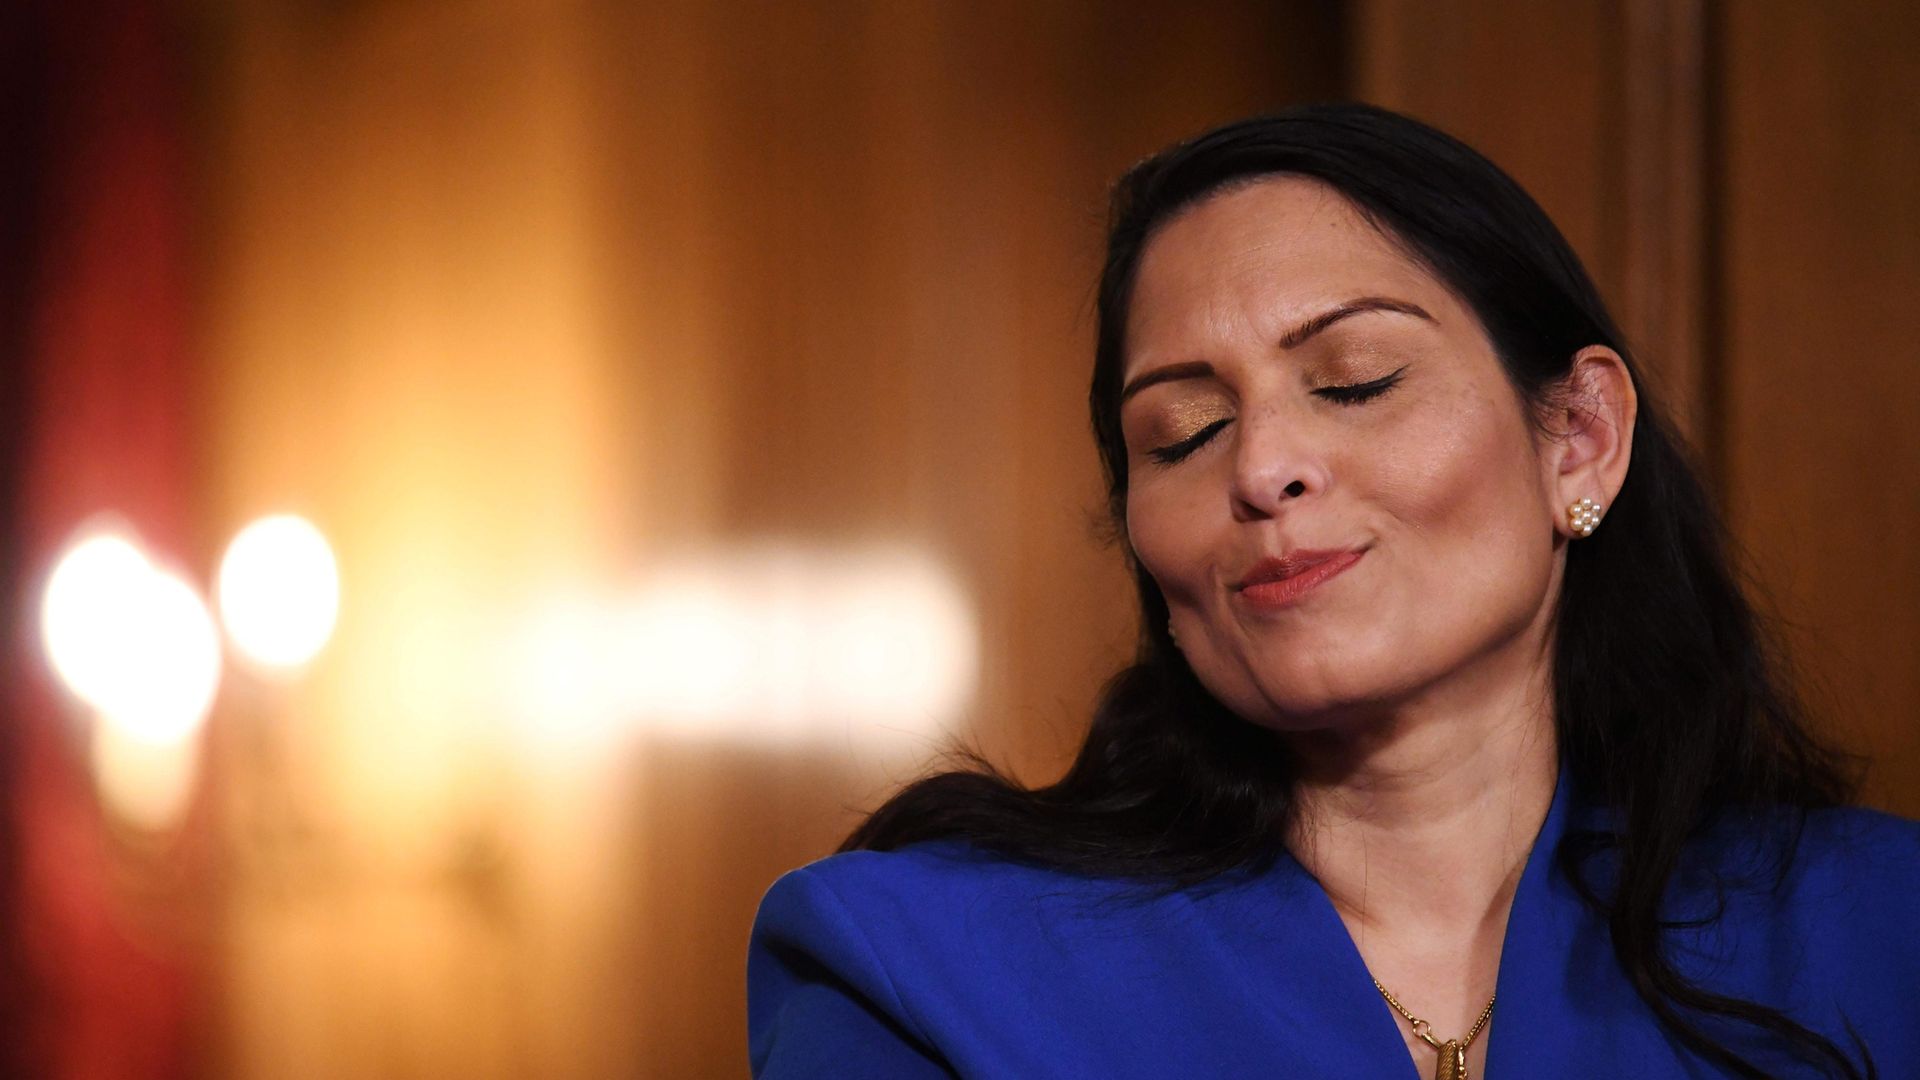 Priti Patel at a Covid briefing in January 2021 - Credit: POOL/AFP via Getty Images